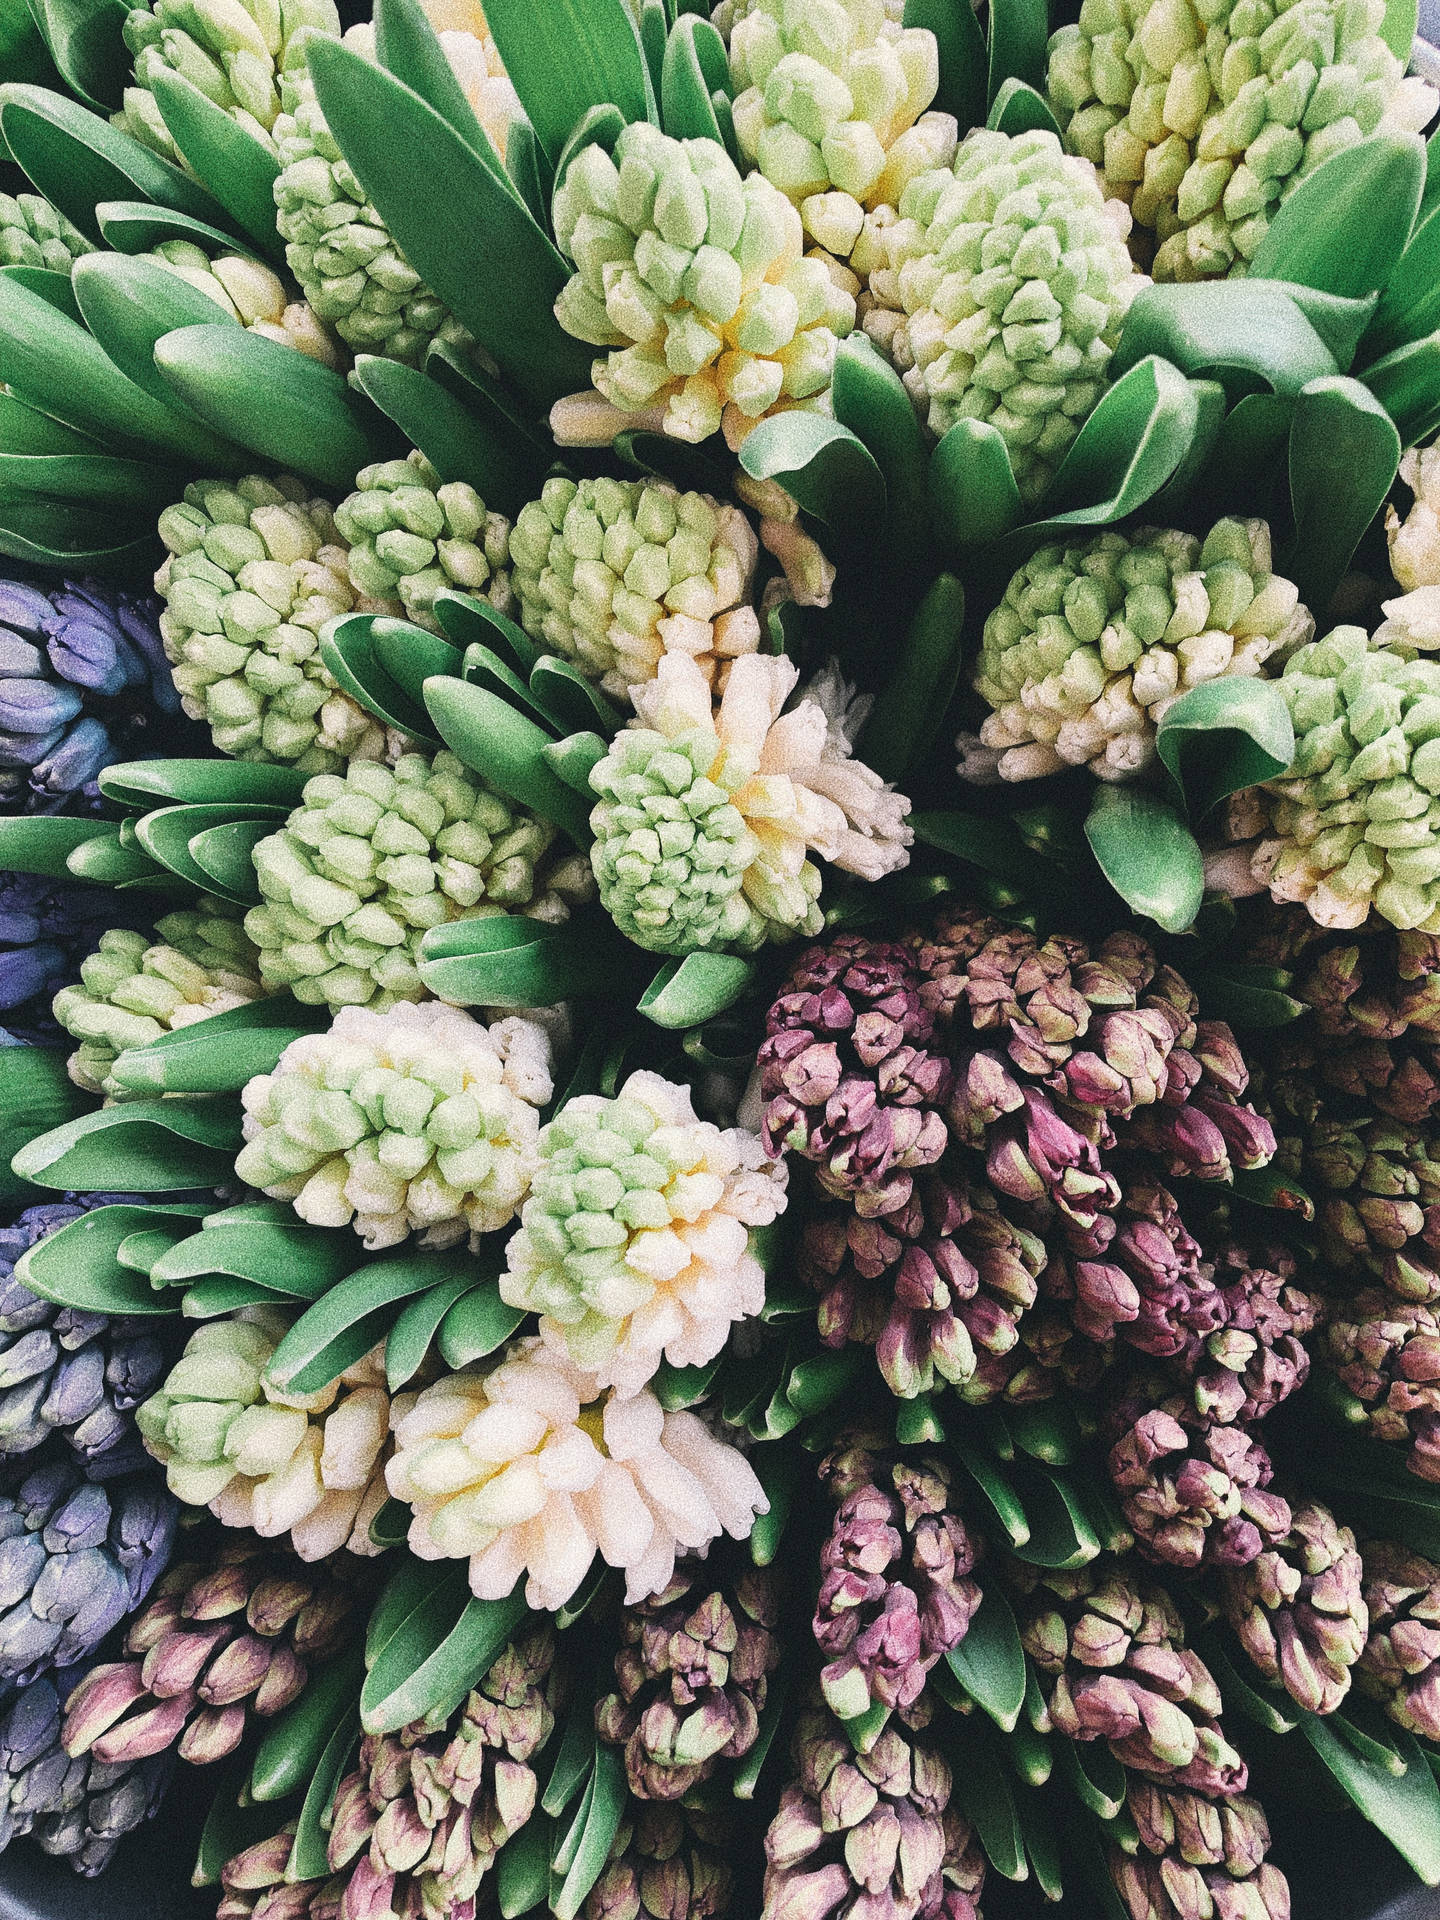 Hyacinth Flowers In The Market